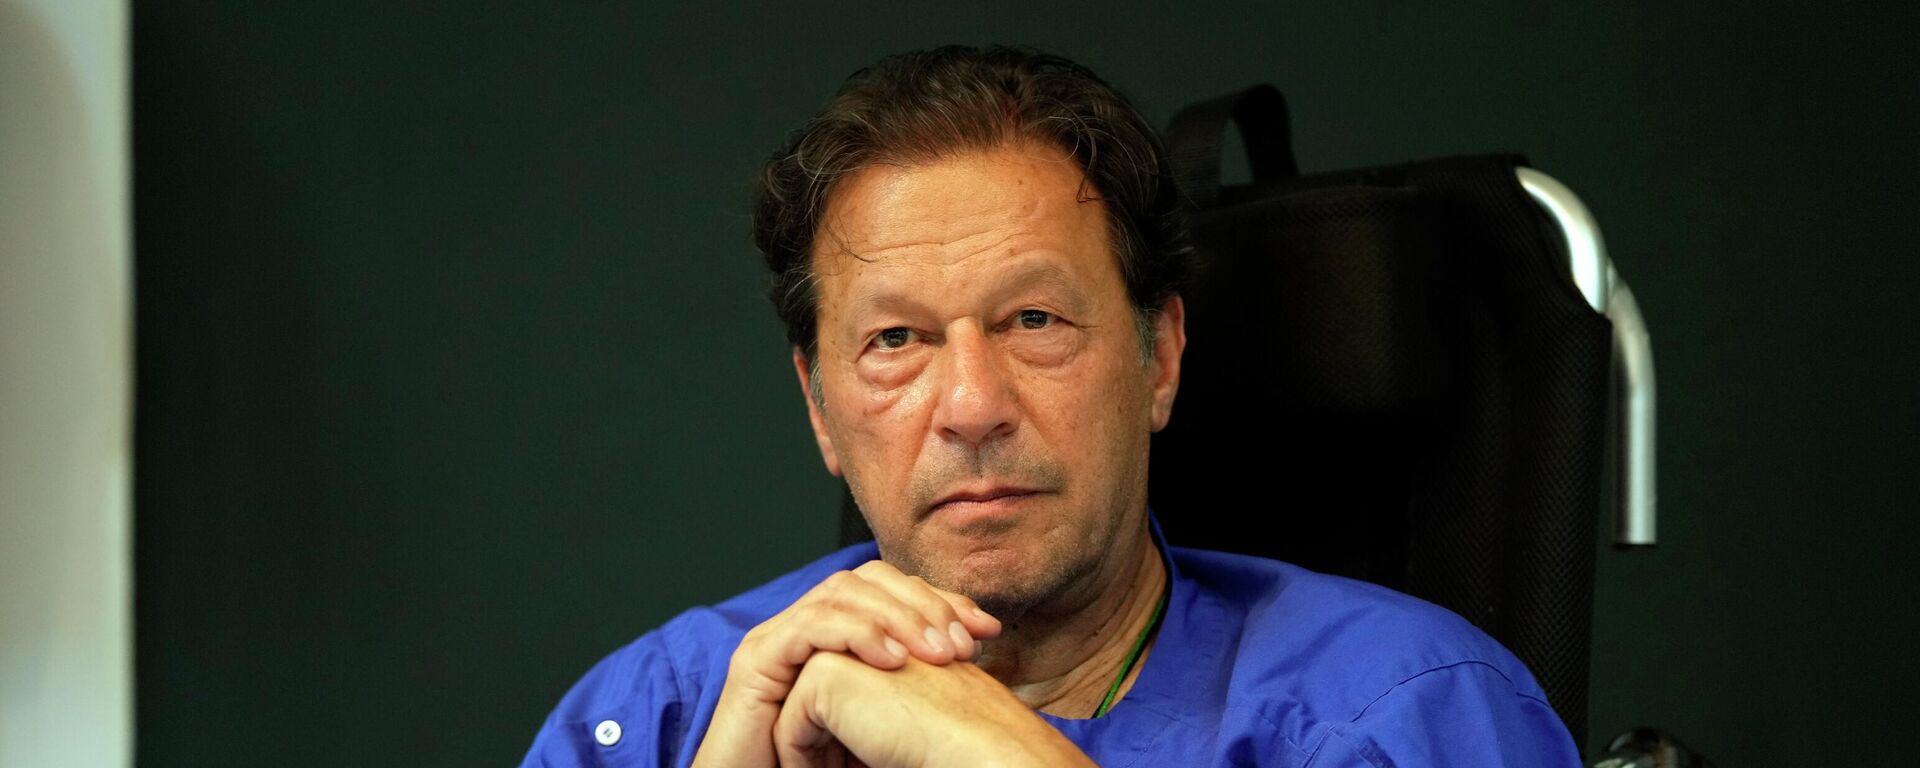 Former Pakistani Prime Minister Imran Khan speaks during a news conference in Shaukat Khanum hospital, where is being treated for a gunshot wound in Lahore, Pakistan, on Nov. 4, 2022. - Sputnik India, 1920, 21.01.2023